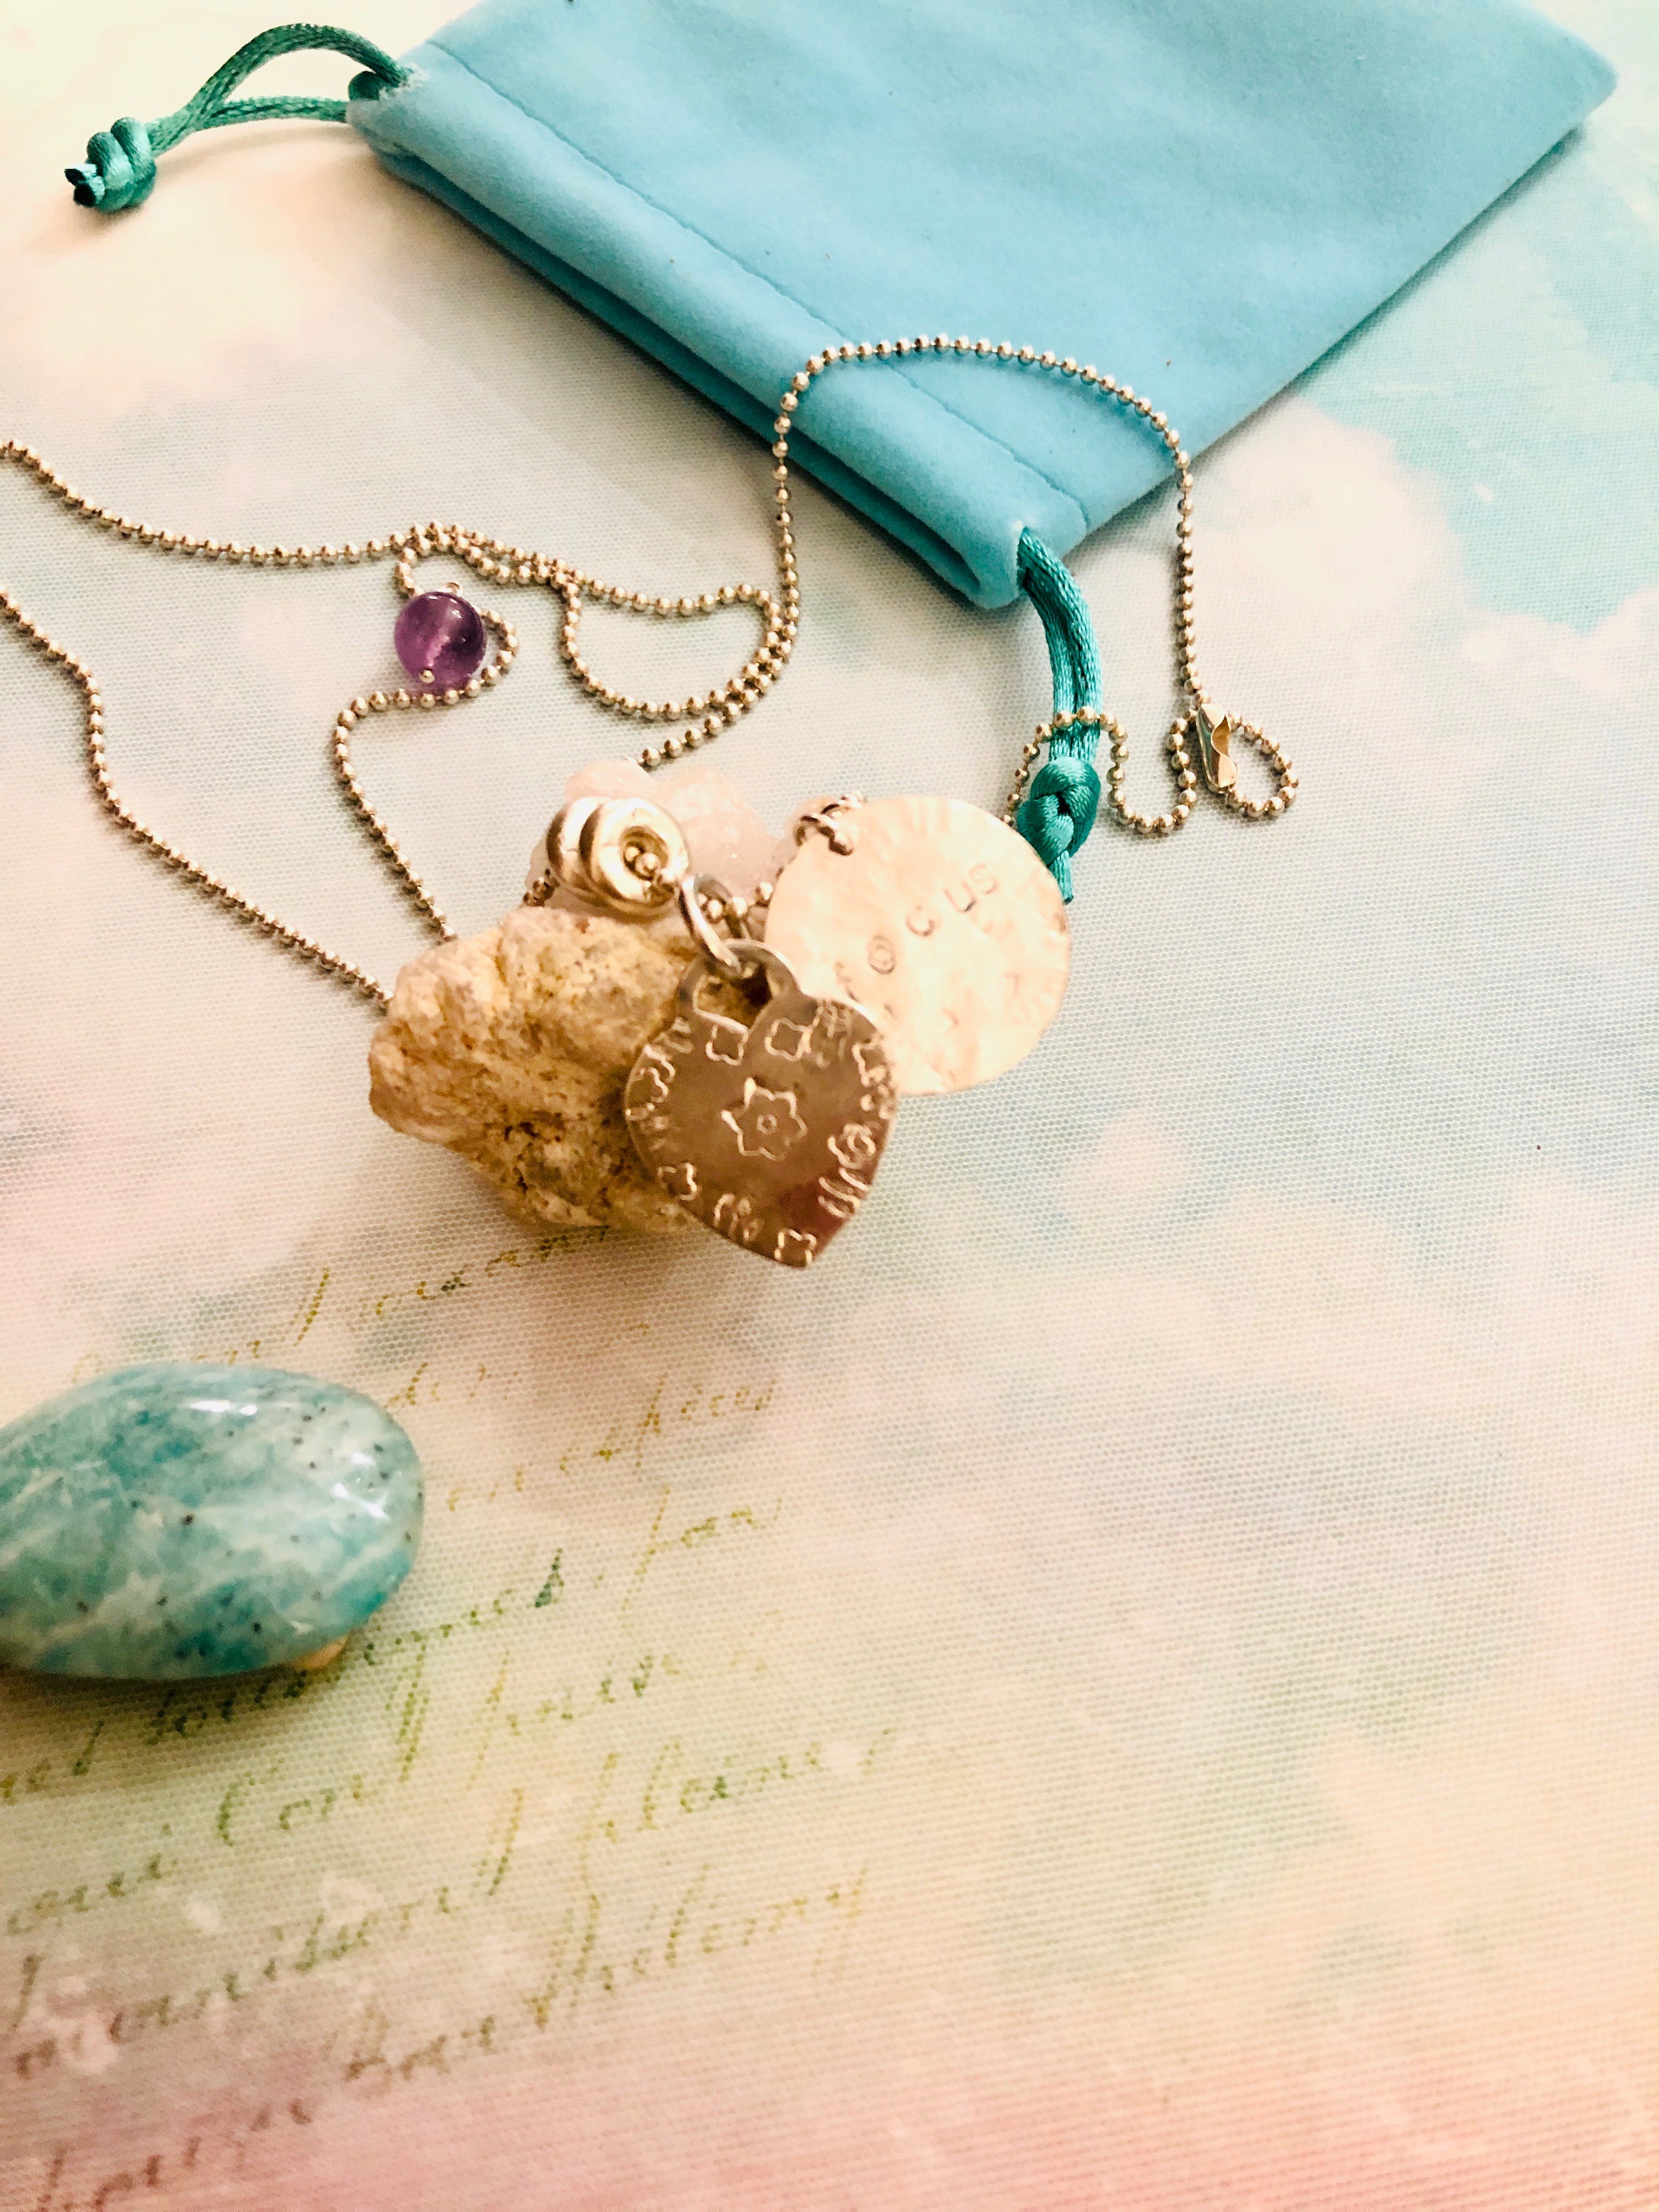 Make Your Own Manifestation Necklace Workshop - Pubs and Clubs